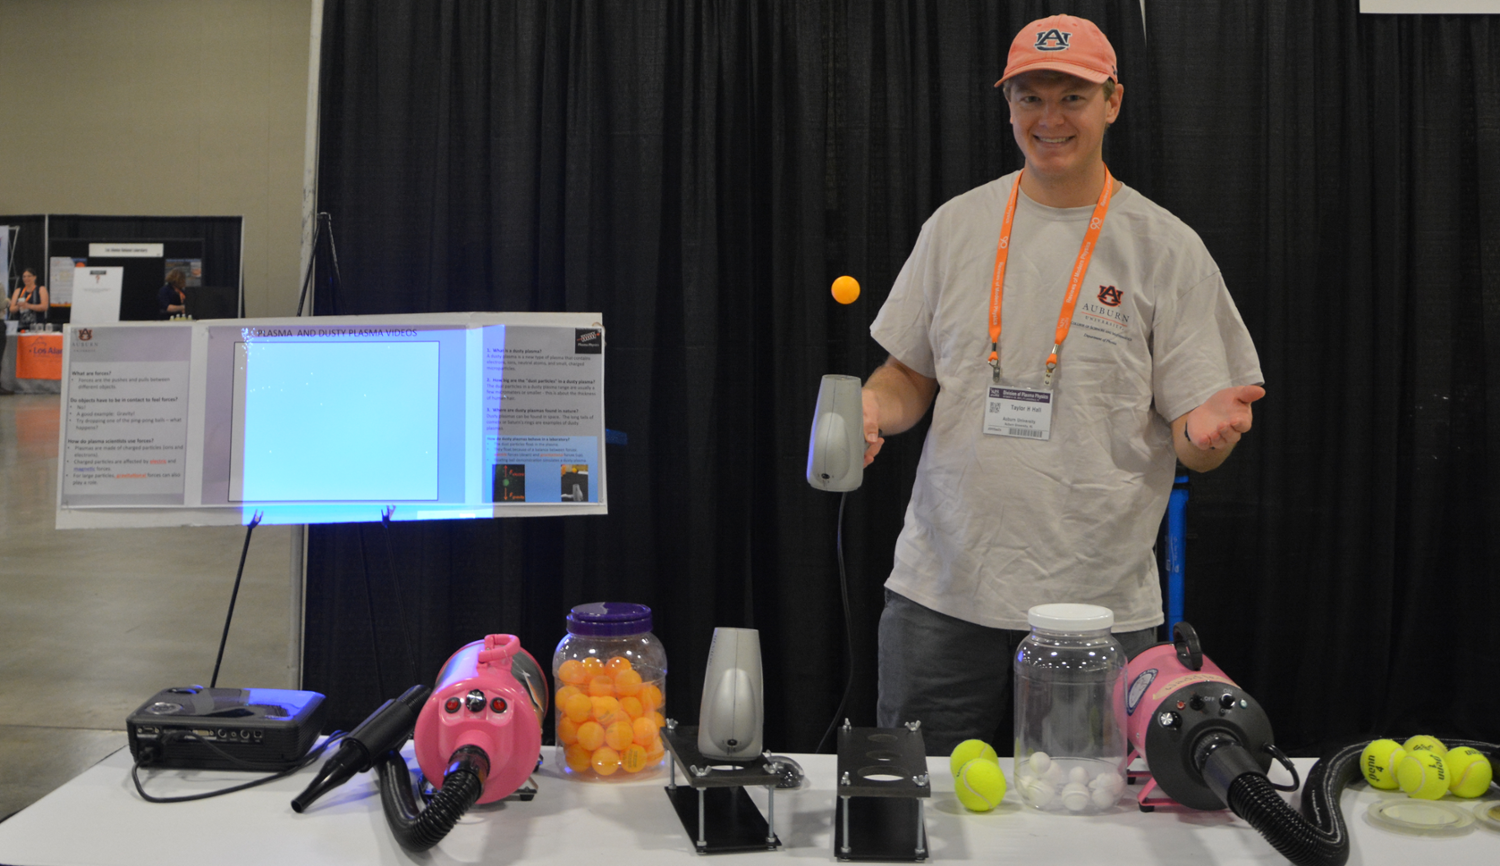 Taylor Hall demonstrates plasma physics to local students at the he 61st Annual Meeting of the APS Division of Plasma Physics held in Fort Lauderdale, Florida.